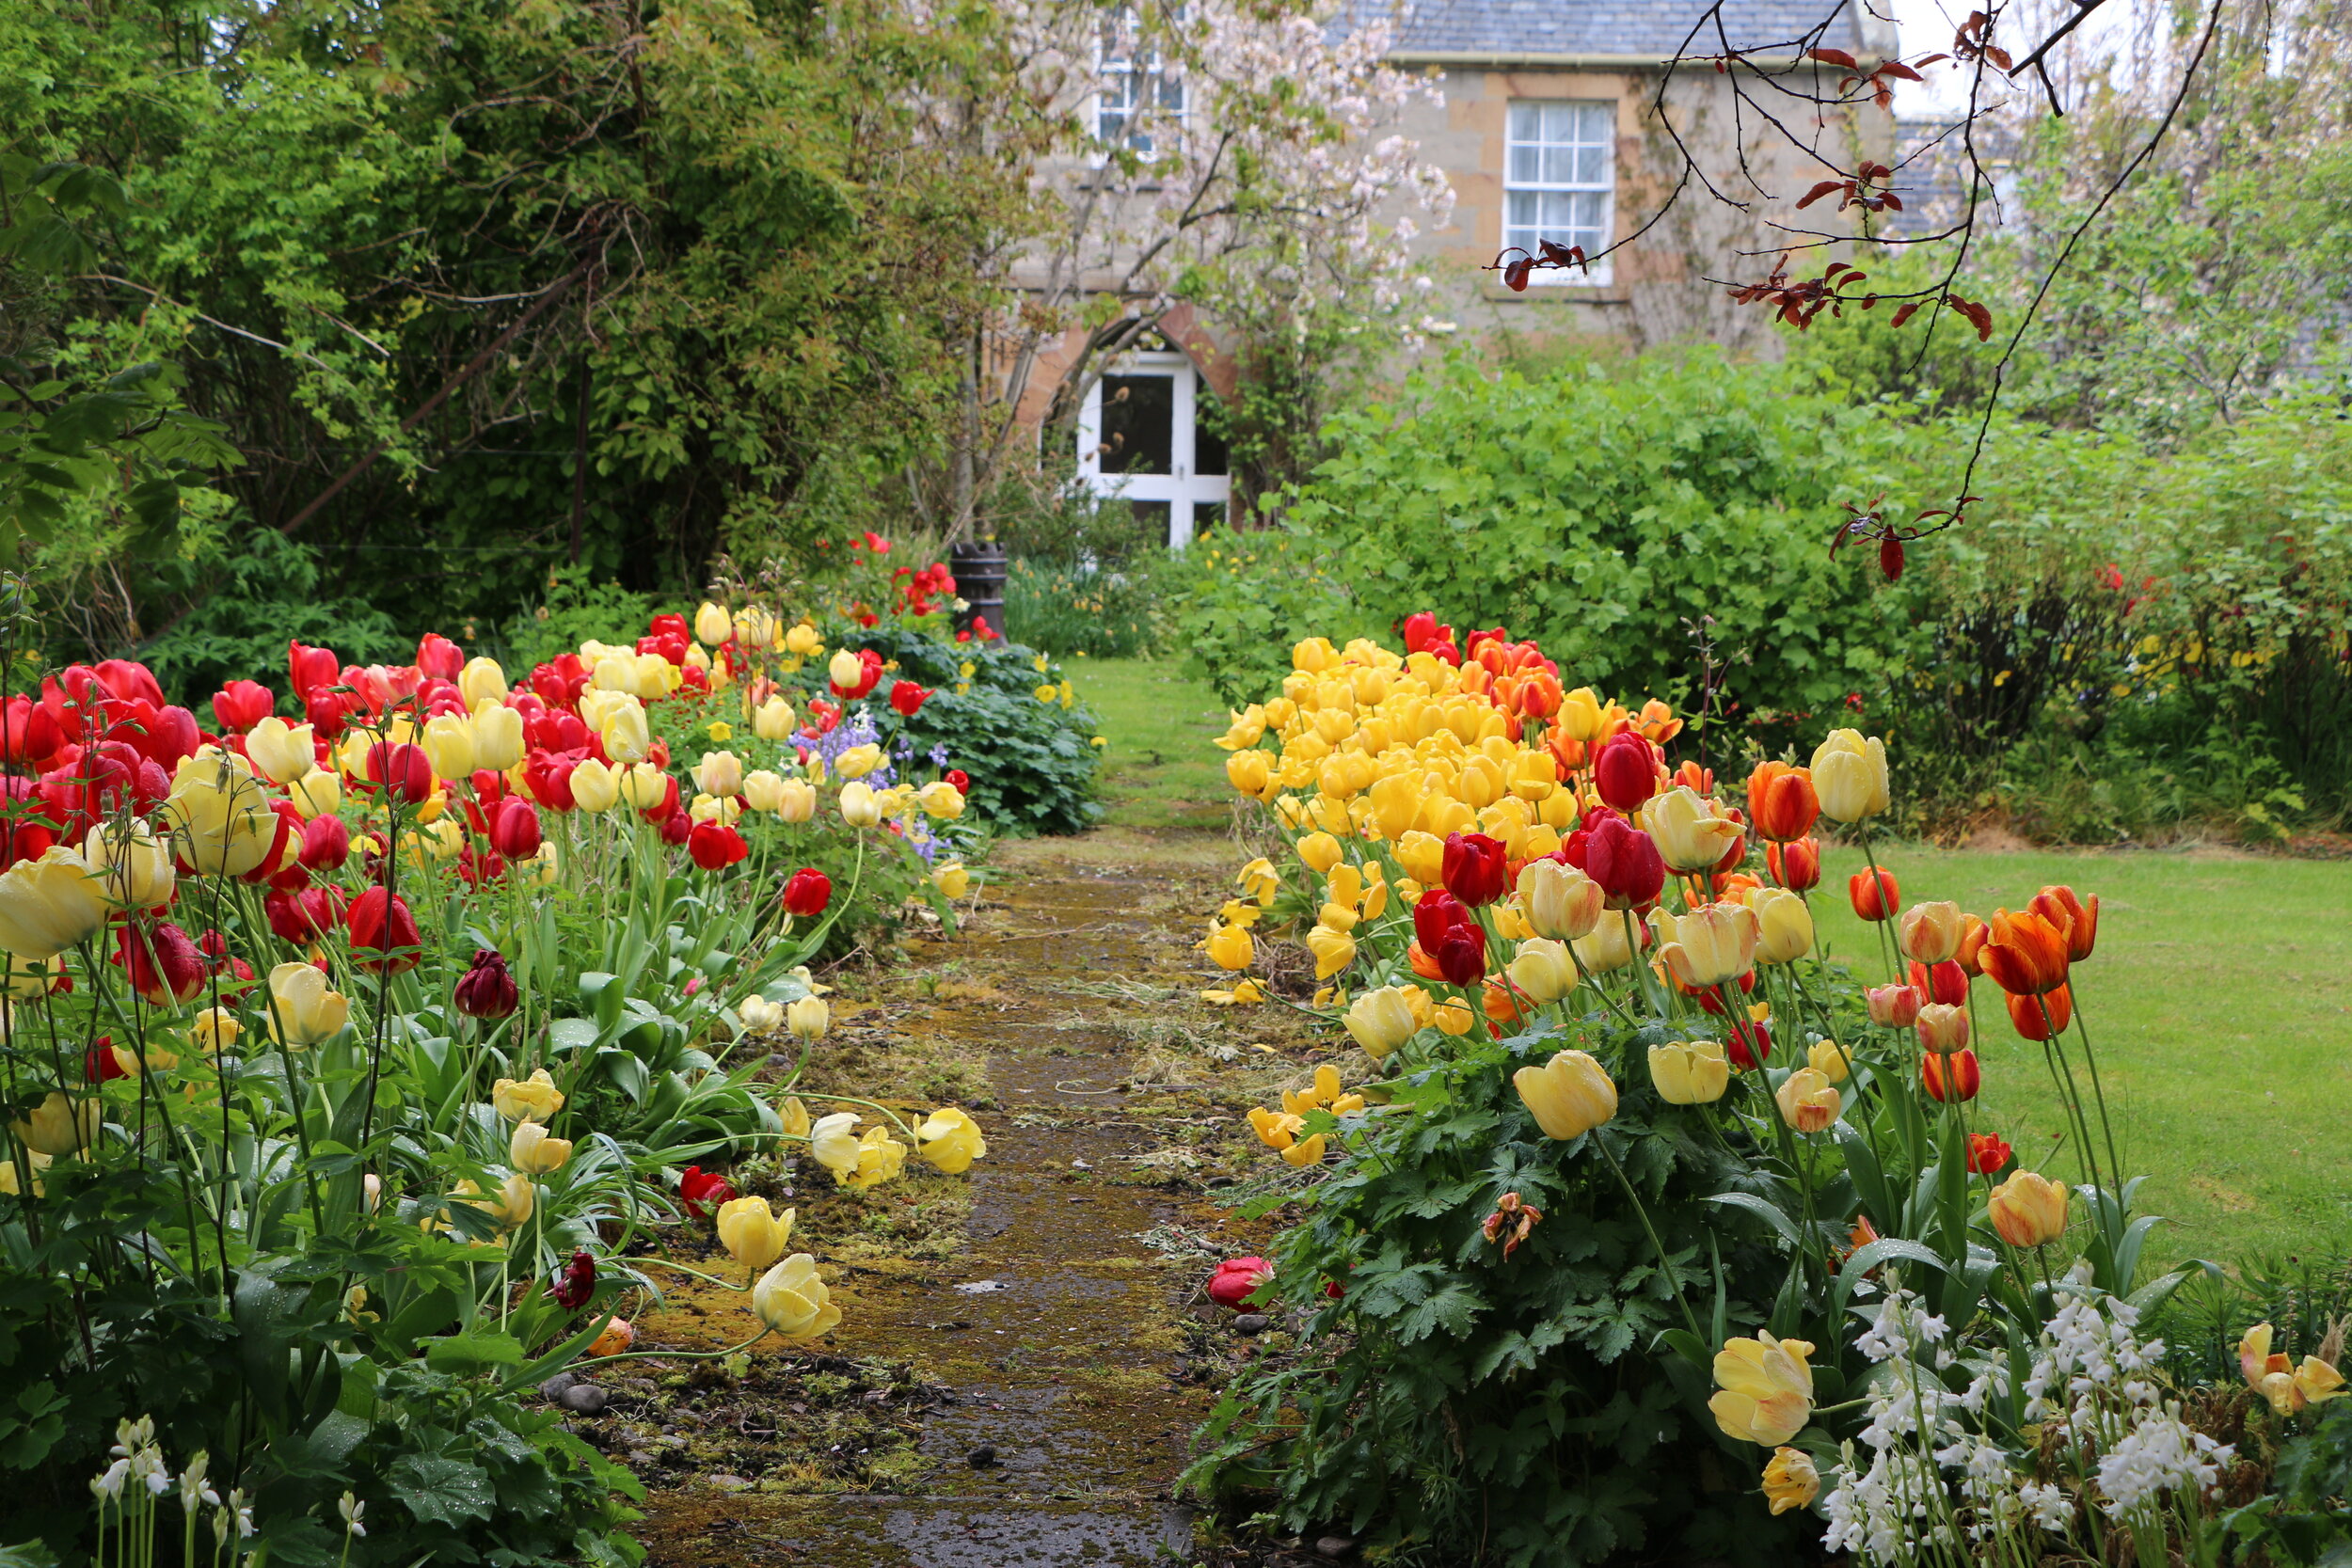 The earth laughs in flowers. Dornoch, Sutherland, Scotland.